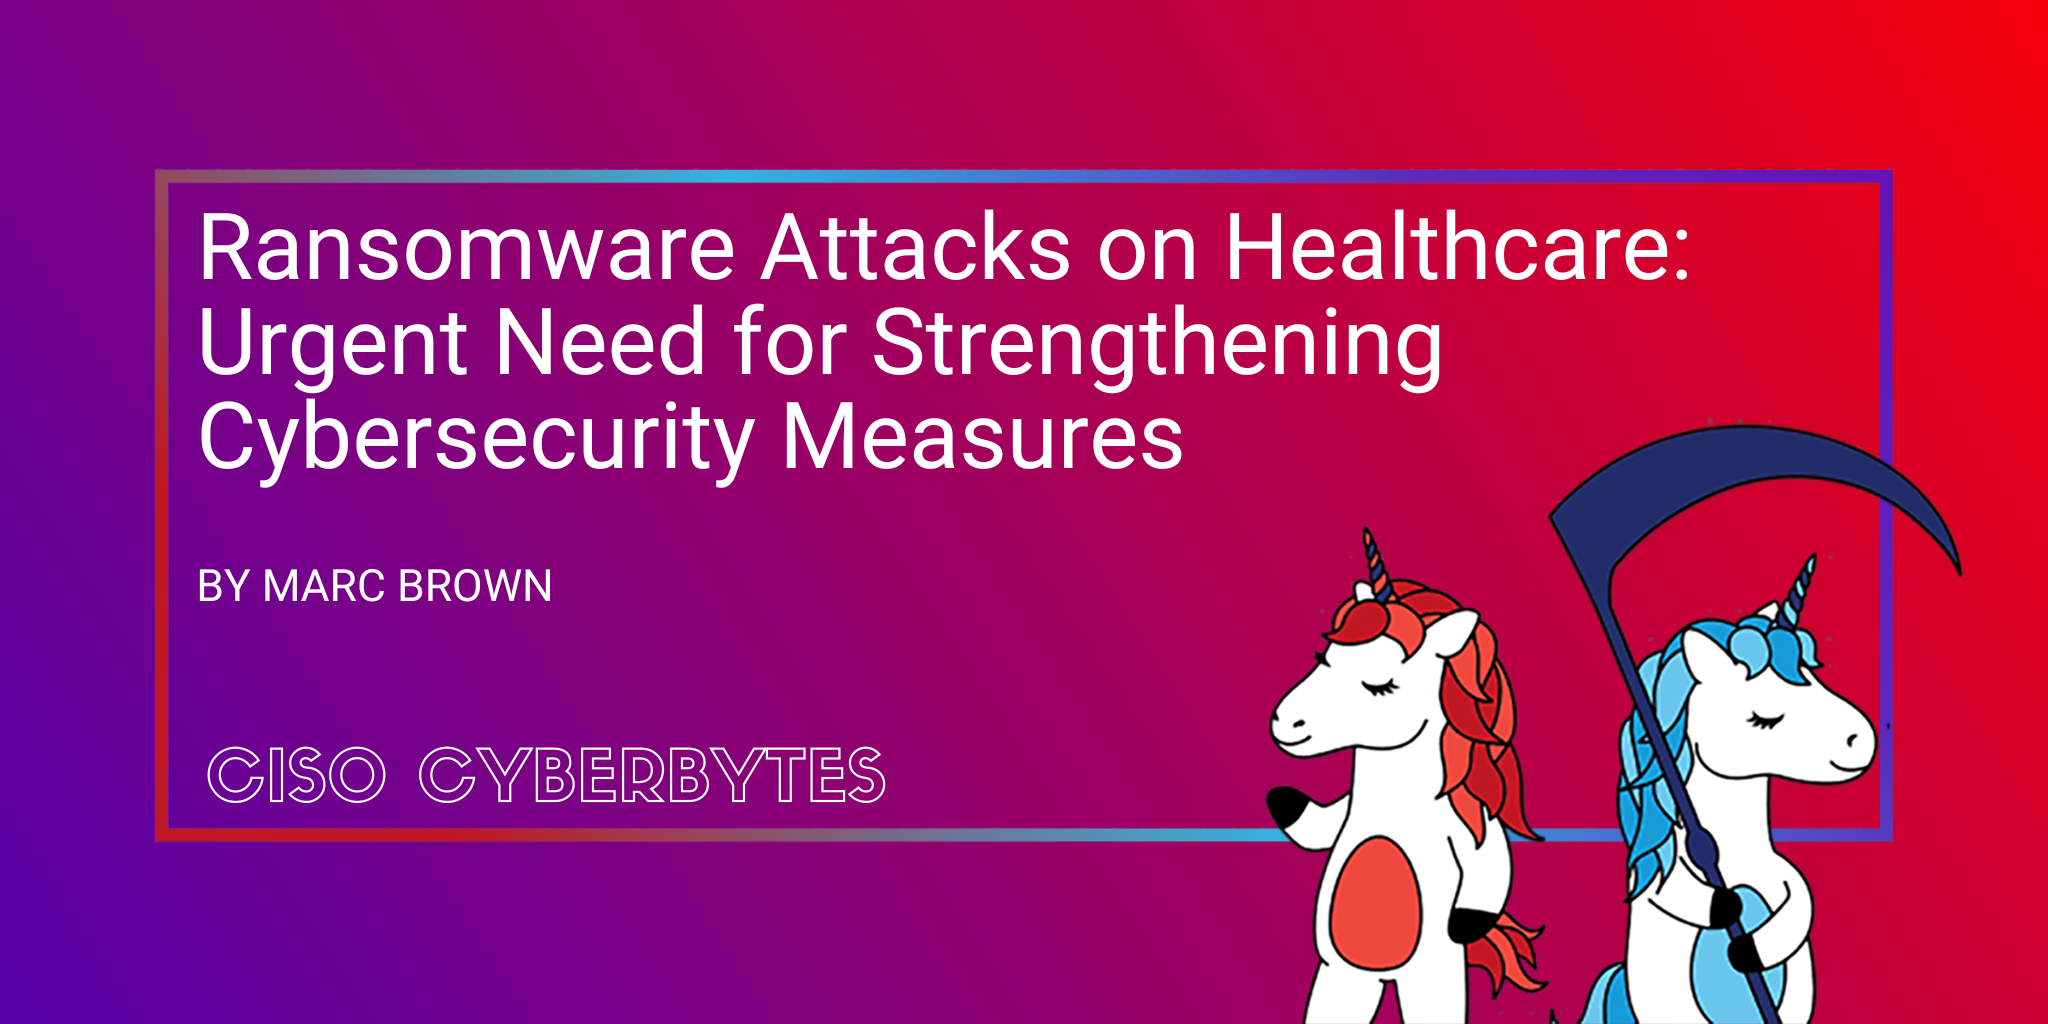 Ransomware Attacks on Healthcare: Urgent Need for Strengthening Cybersecurity Measures